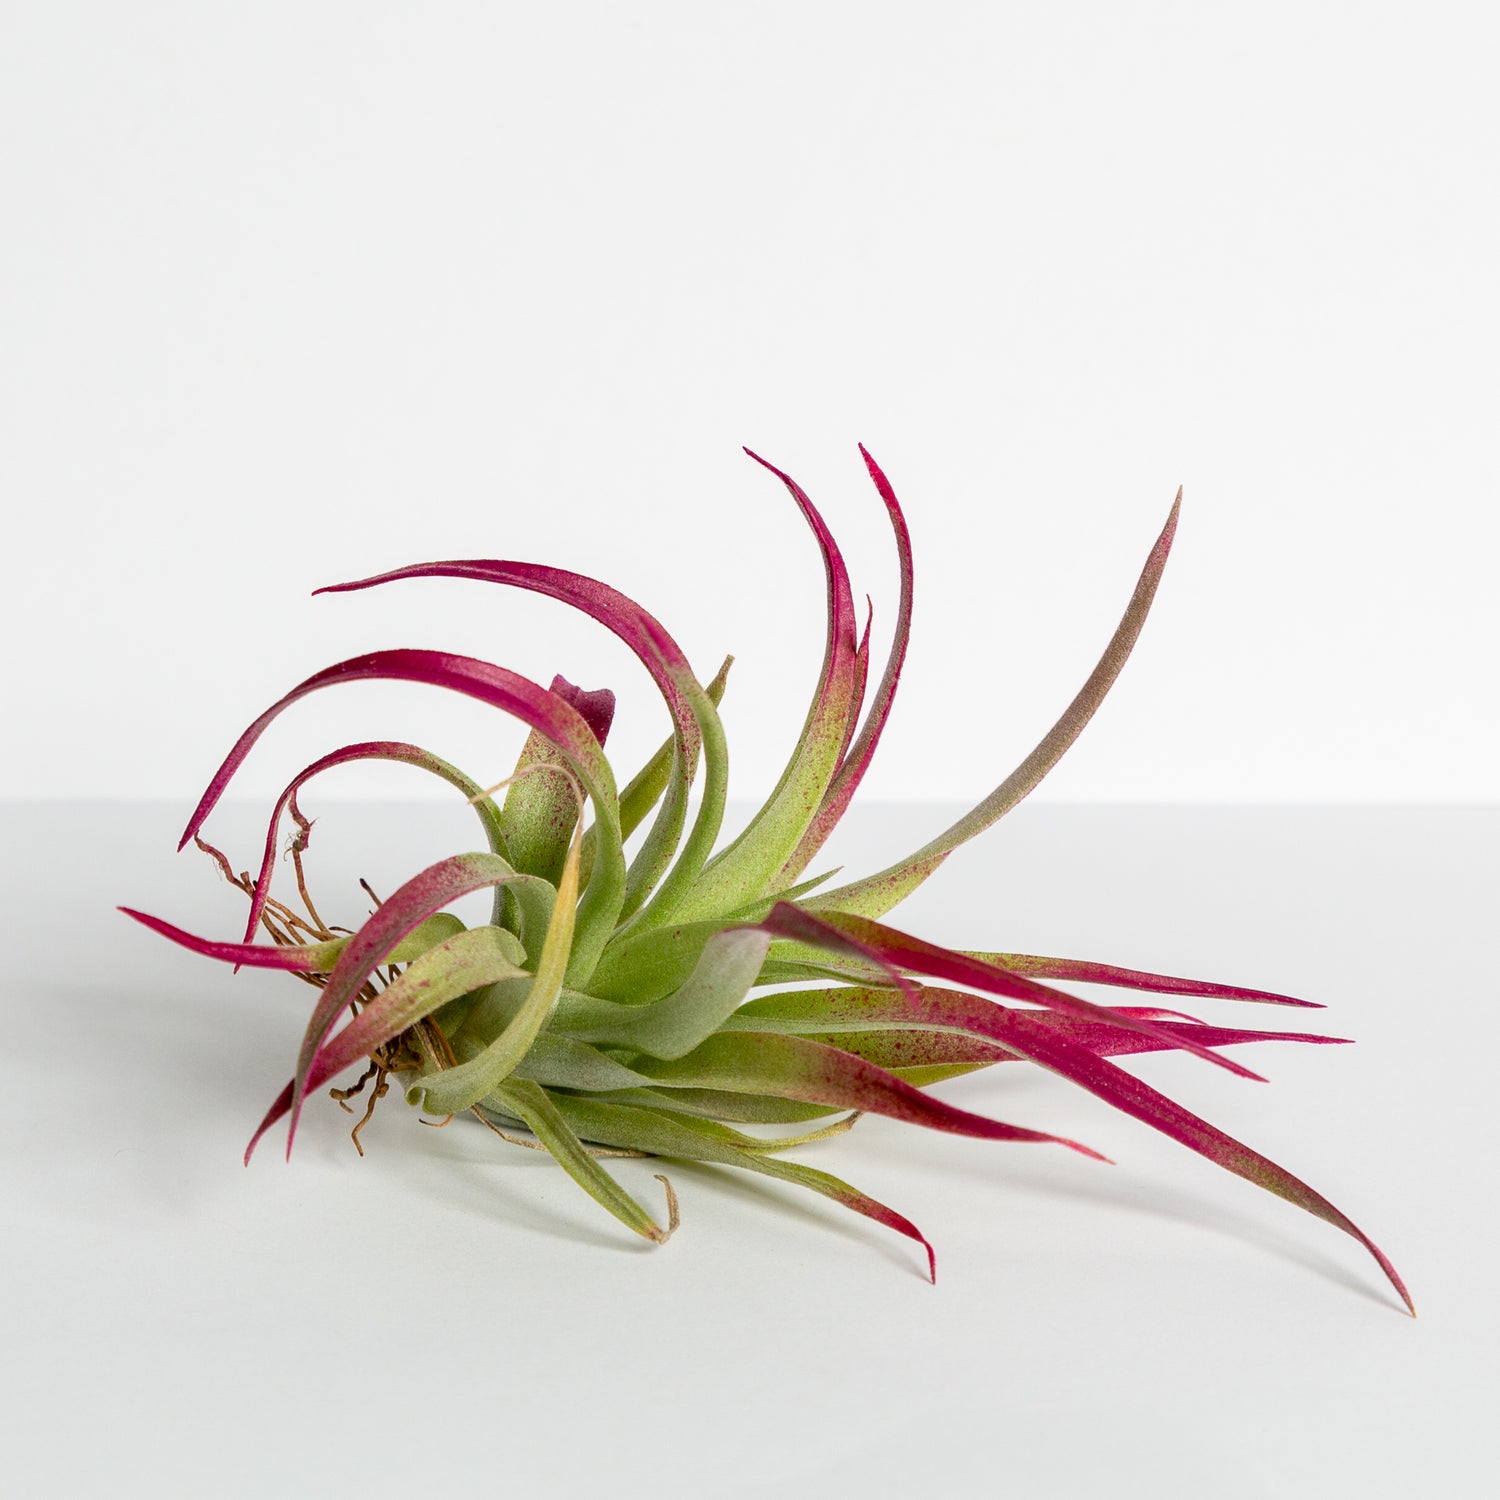 Air Plant 'Harrisii - Burgundy' 4-5" - Urban Sprouts